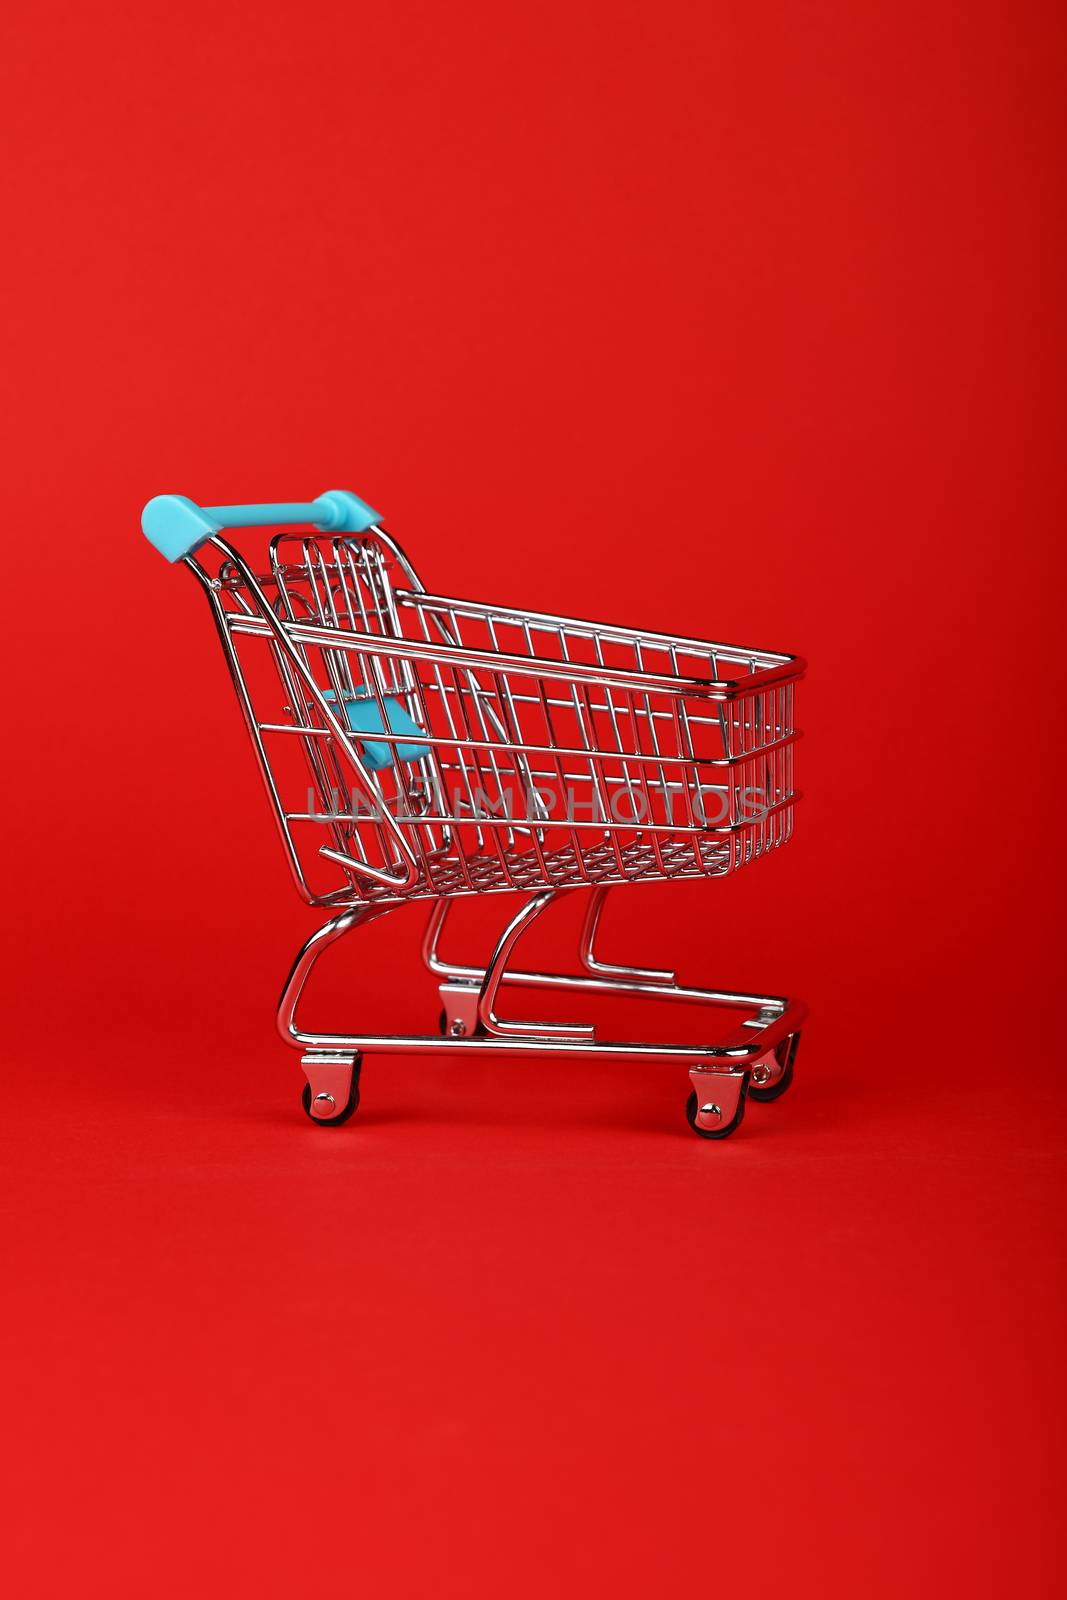 Close up retail shopping cart on red background by BreakingTheWalls